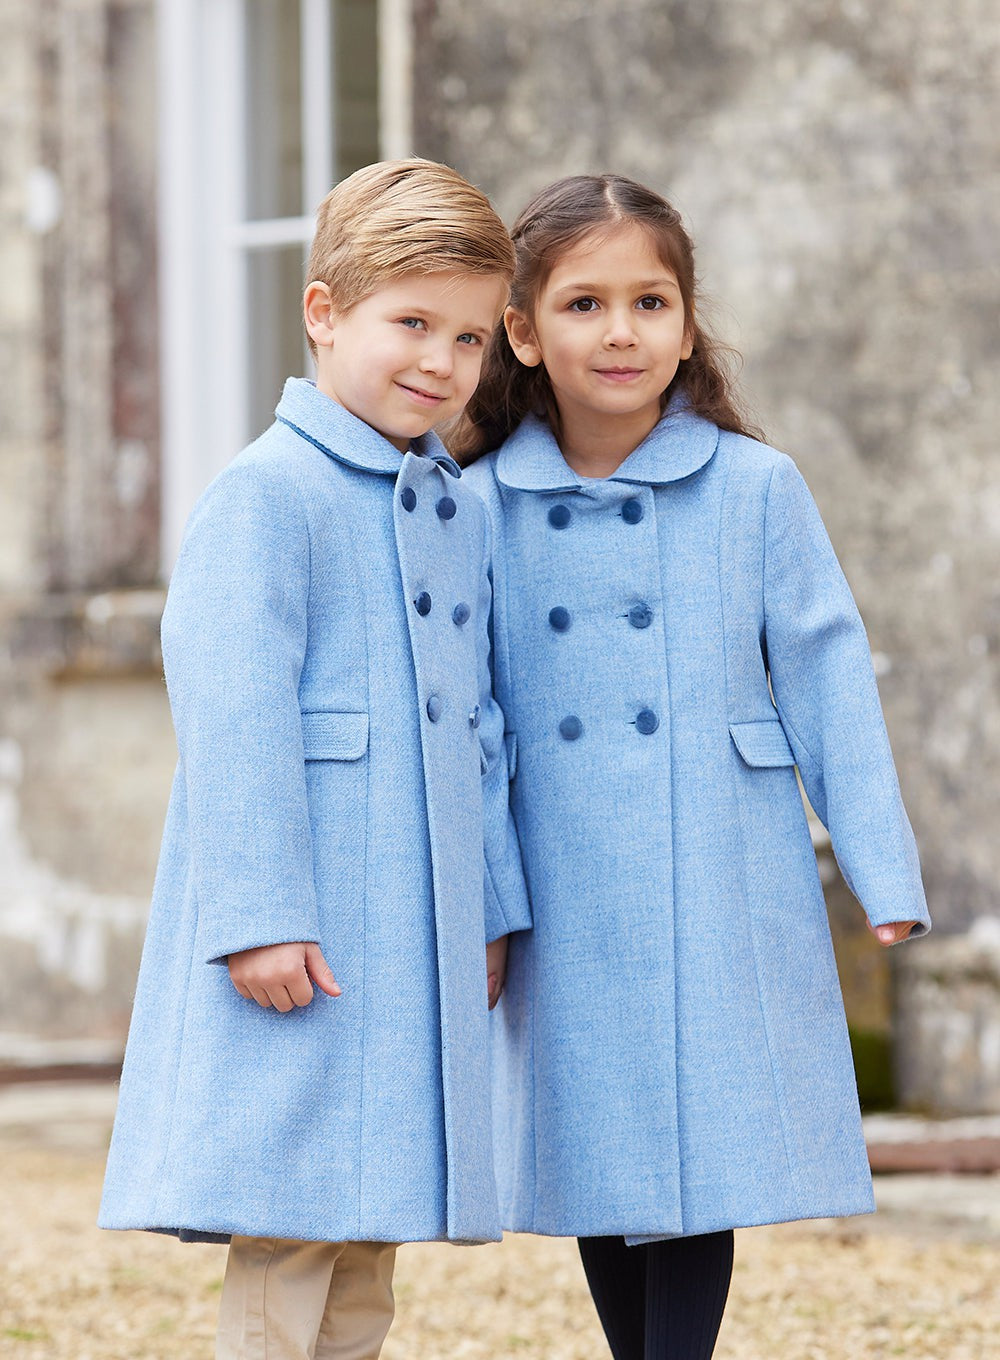 Trotters Heritage Classic Children's Coat in Pale Blue Twill